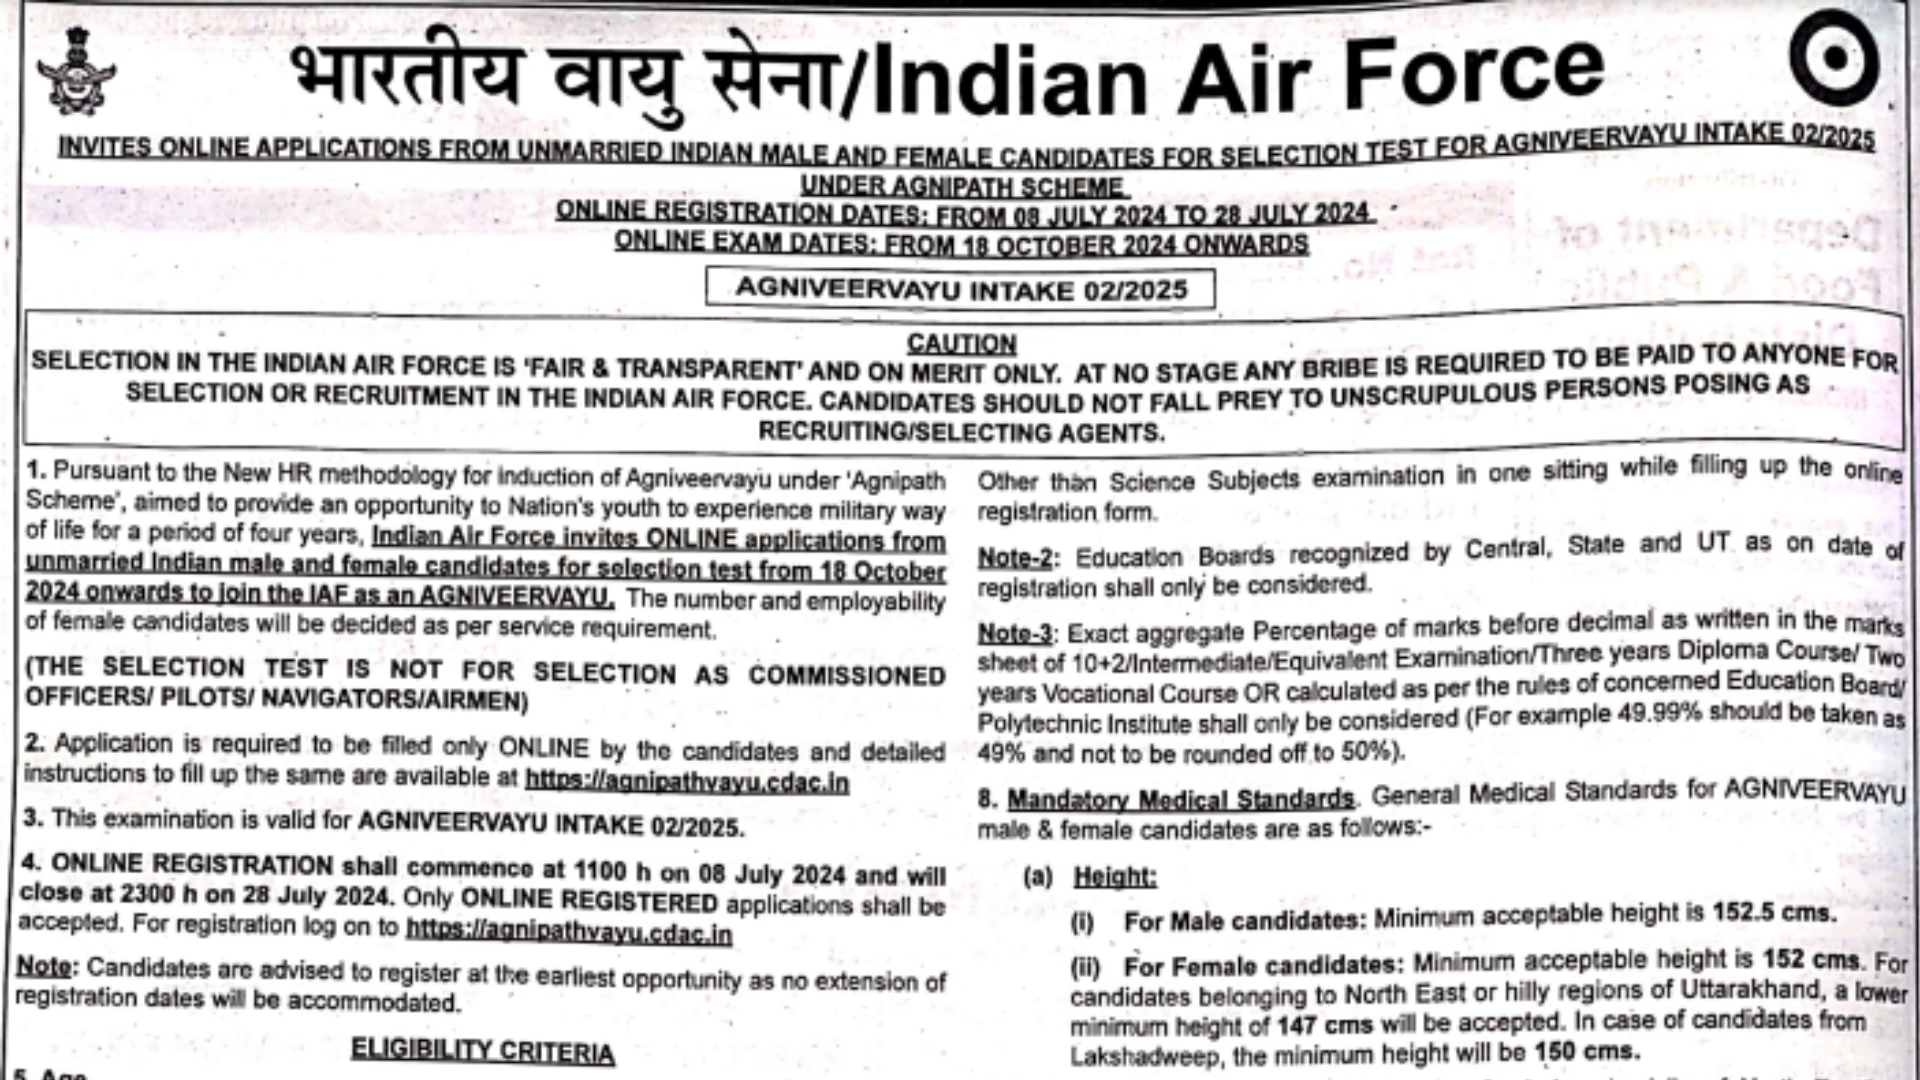 Air Force Agniveer 02/2025 Notification Out, Online Application Form